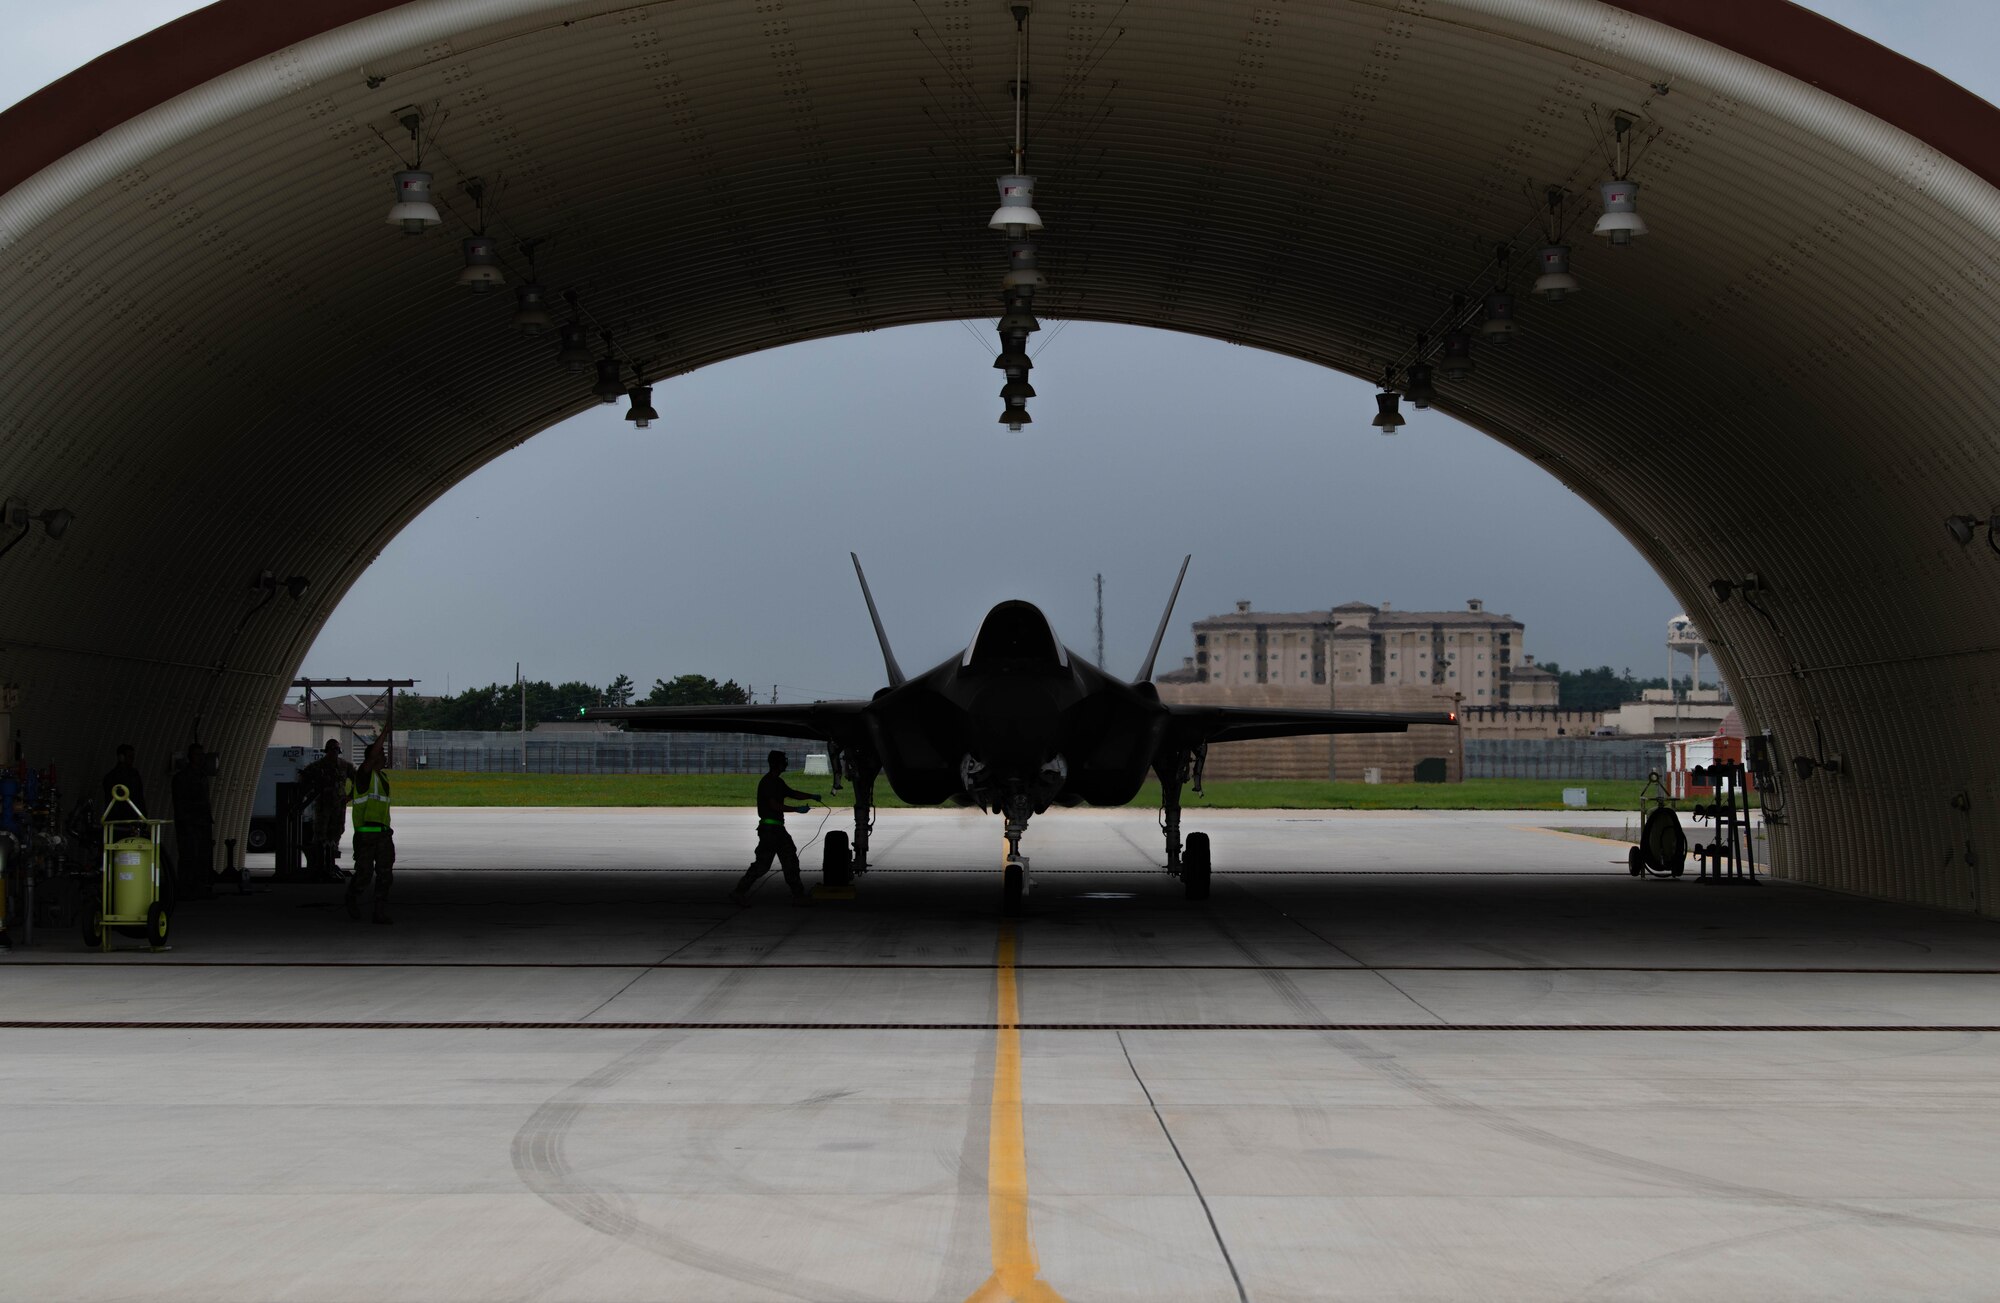 An airman from the 8th Logistic Readiness Squadron, grounds an F-35A Lightning II before refueling at Kunsan Air Base, Republic of Korea, July 11, 2022. U.S. Air Force F-35 aircraft from Eielson Air Force Base, Alaska arrived in the Republic of Korea to conduct training flights with ROKAF to enhance
interoperability between the two Air Forces on and around the Korean Peninsula. (U.S. Air Force photo by Senior Airman Shannon Braaten)